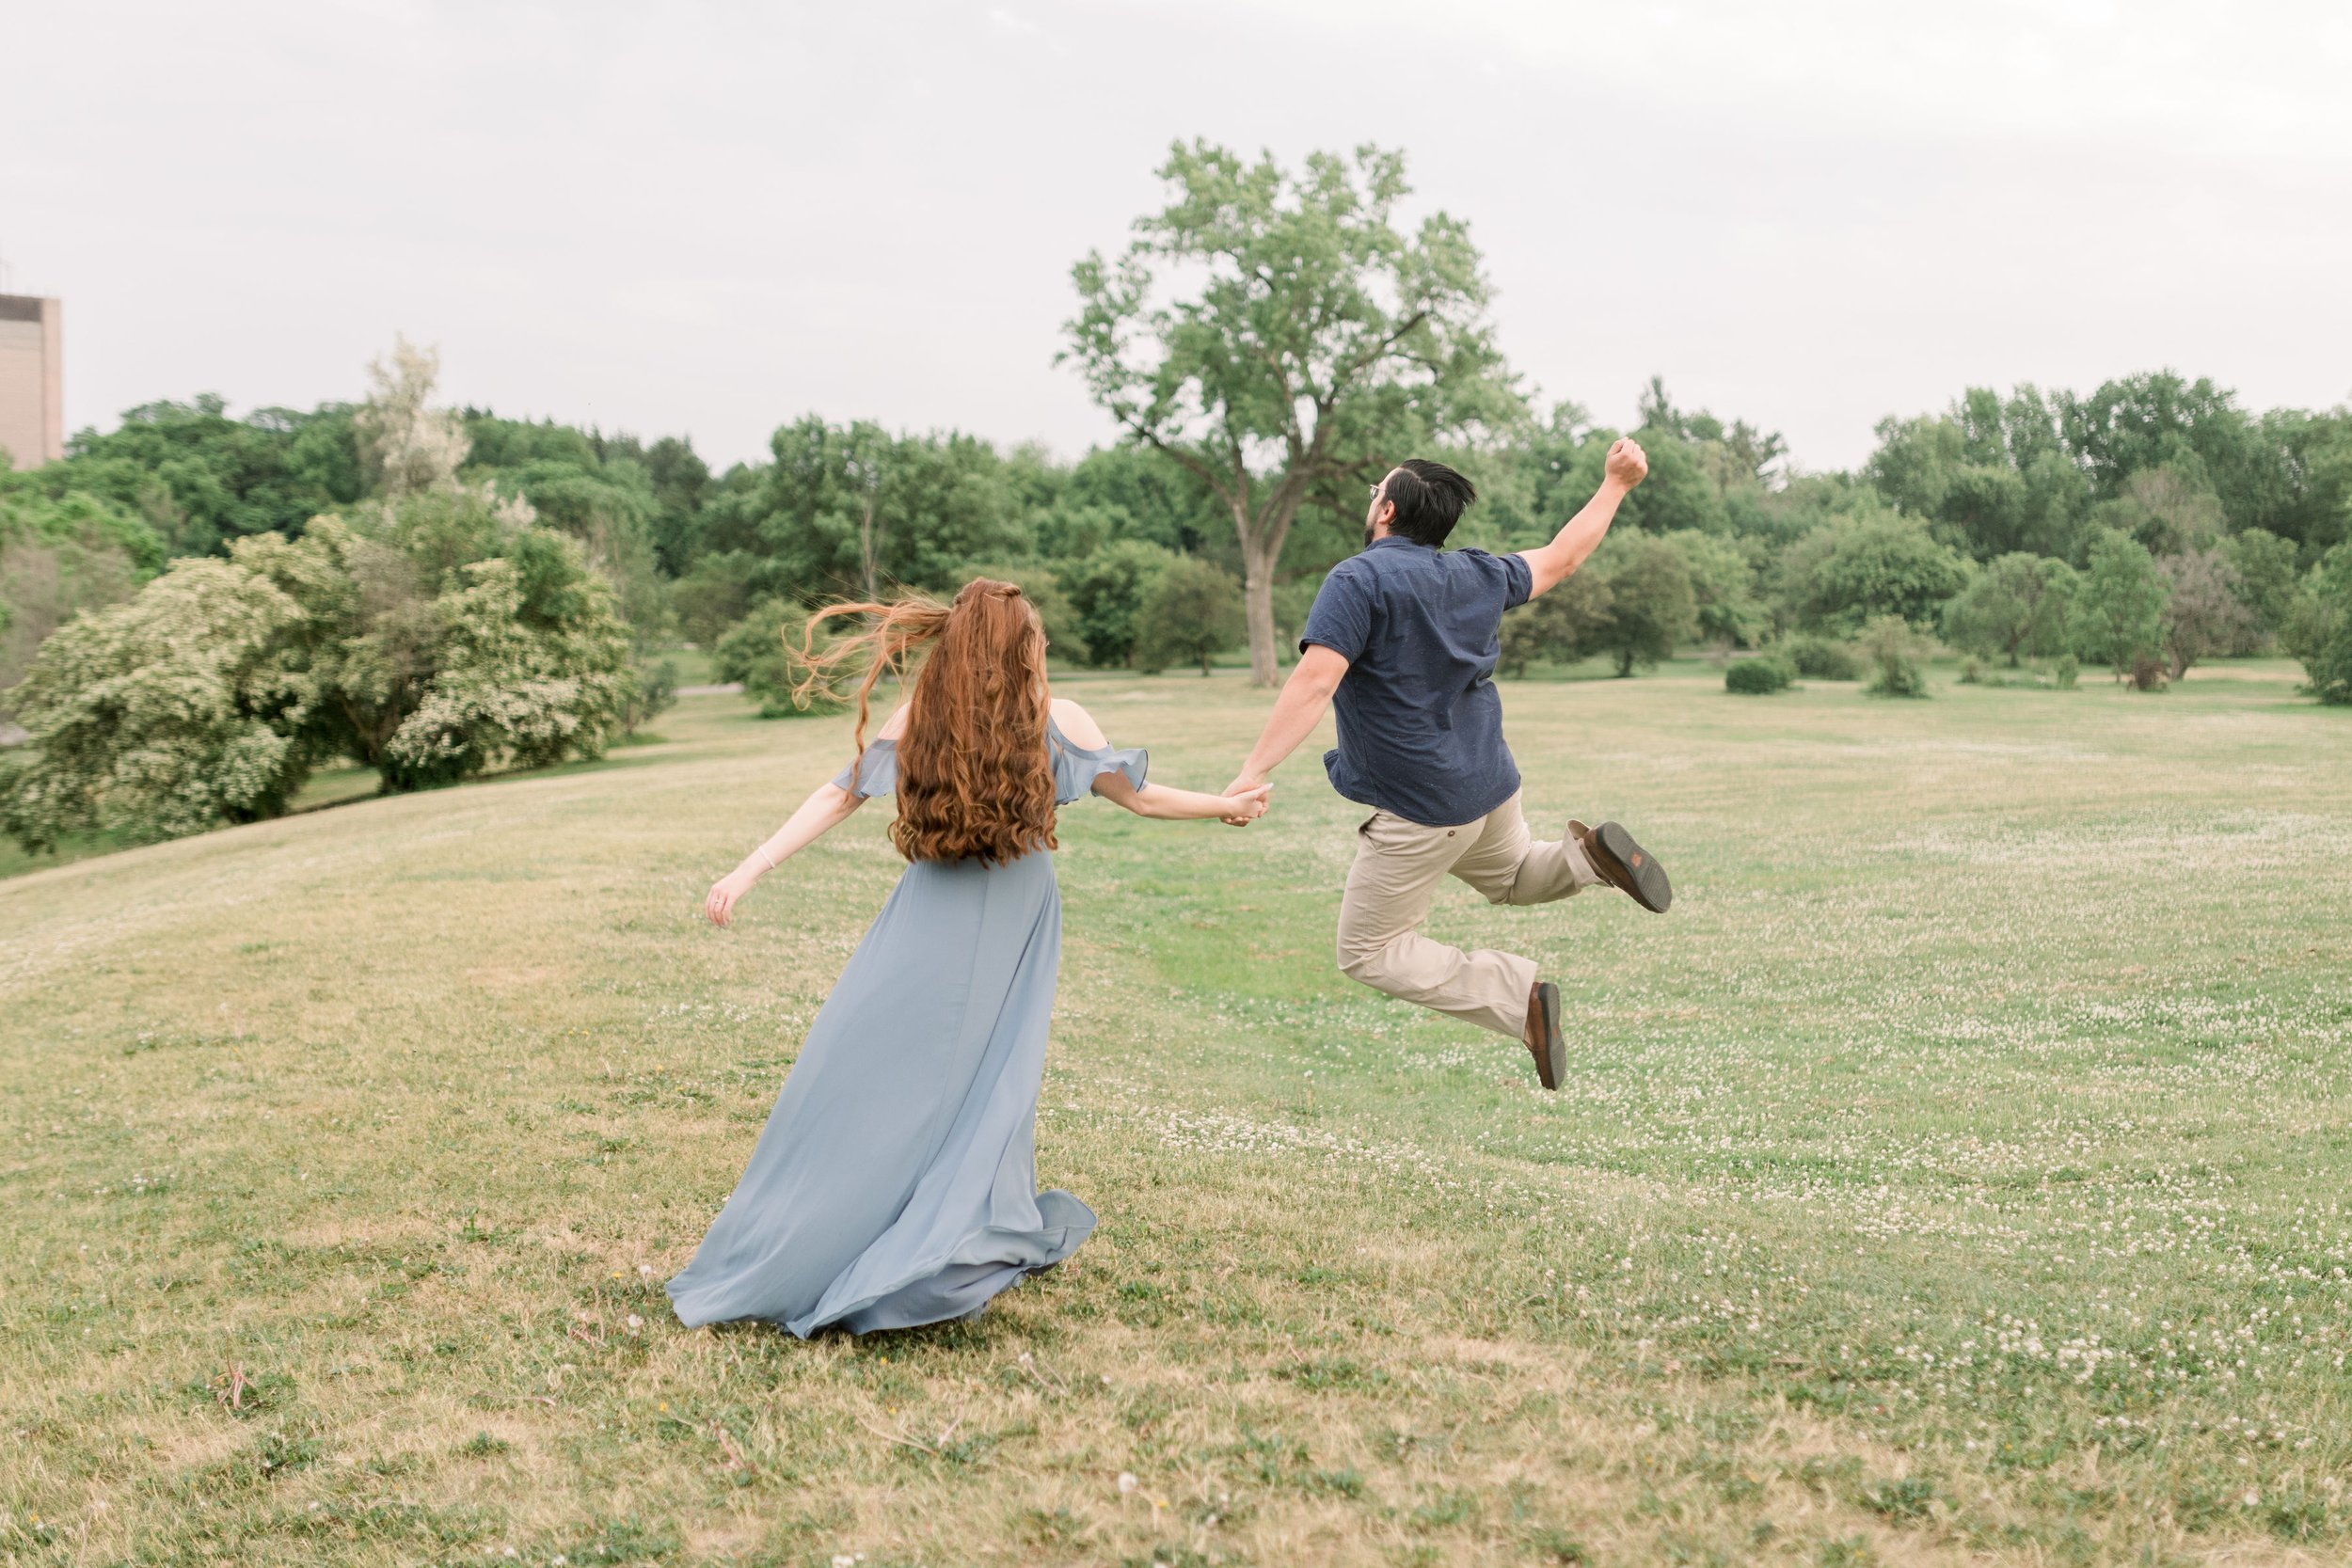  During an engagement session in Ottawa, a man does a heel click while holding his fiance's hand by Chelsea Mason Photography. heel click #chelseamasonphotography #chelseamasonengagements #Ottawaengagements #DominonArboretum #Ottawaphotographers&nbsp